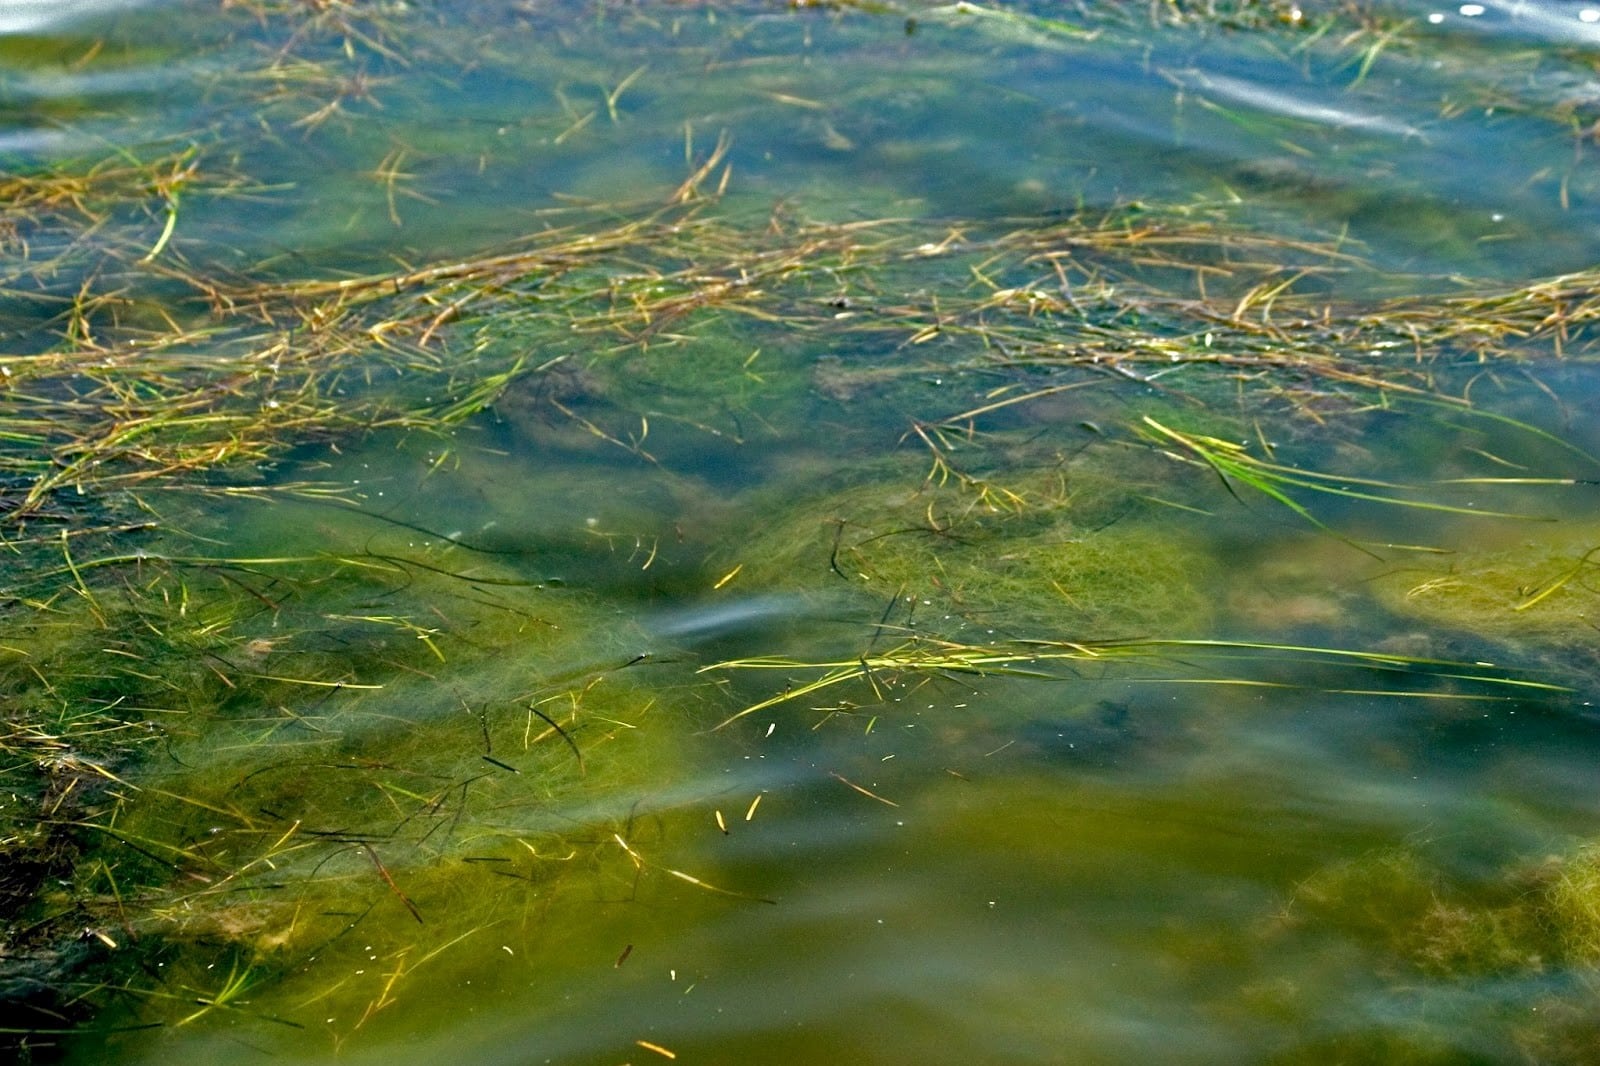 A close up of green algae and aquatic plants in the water